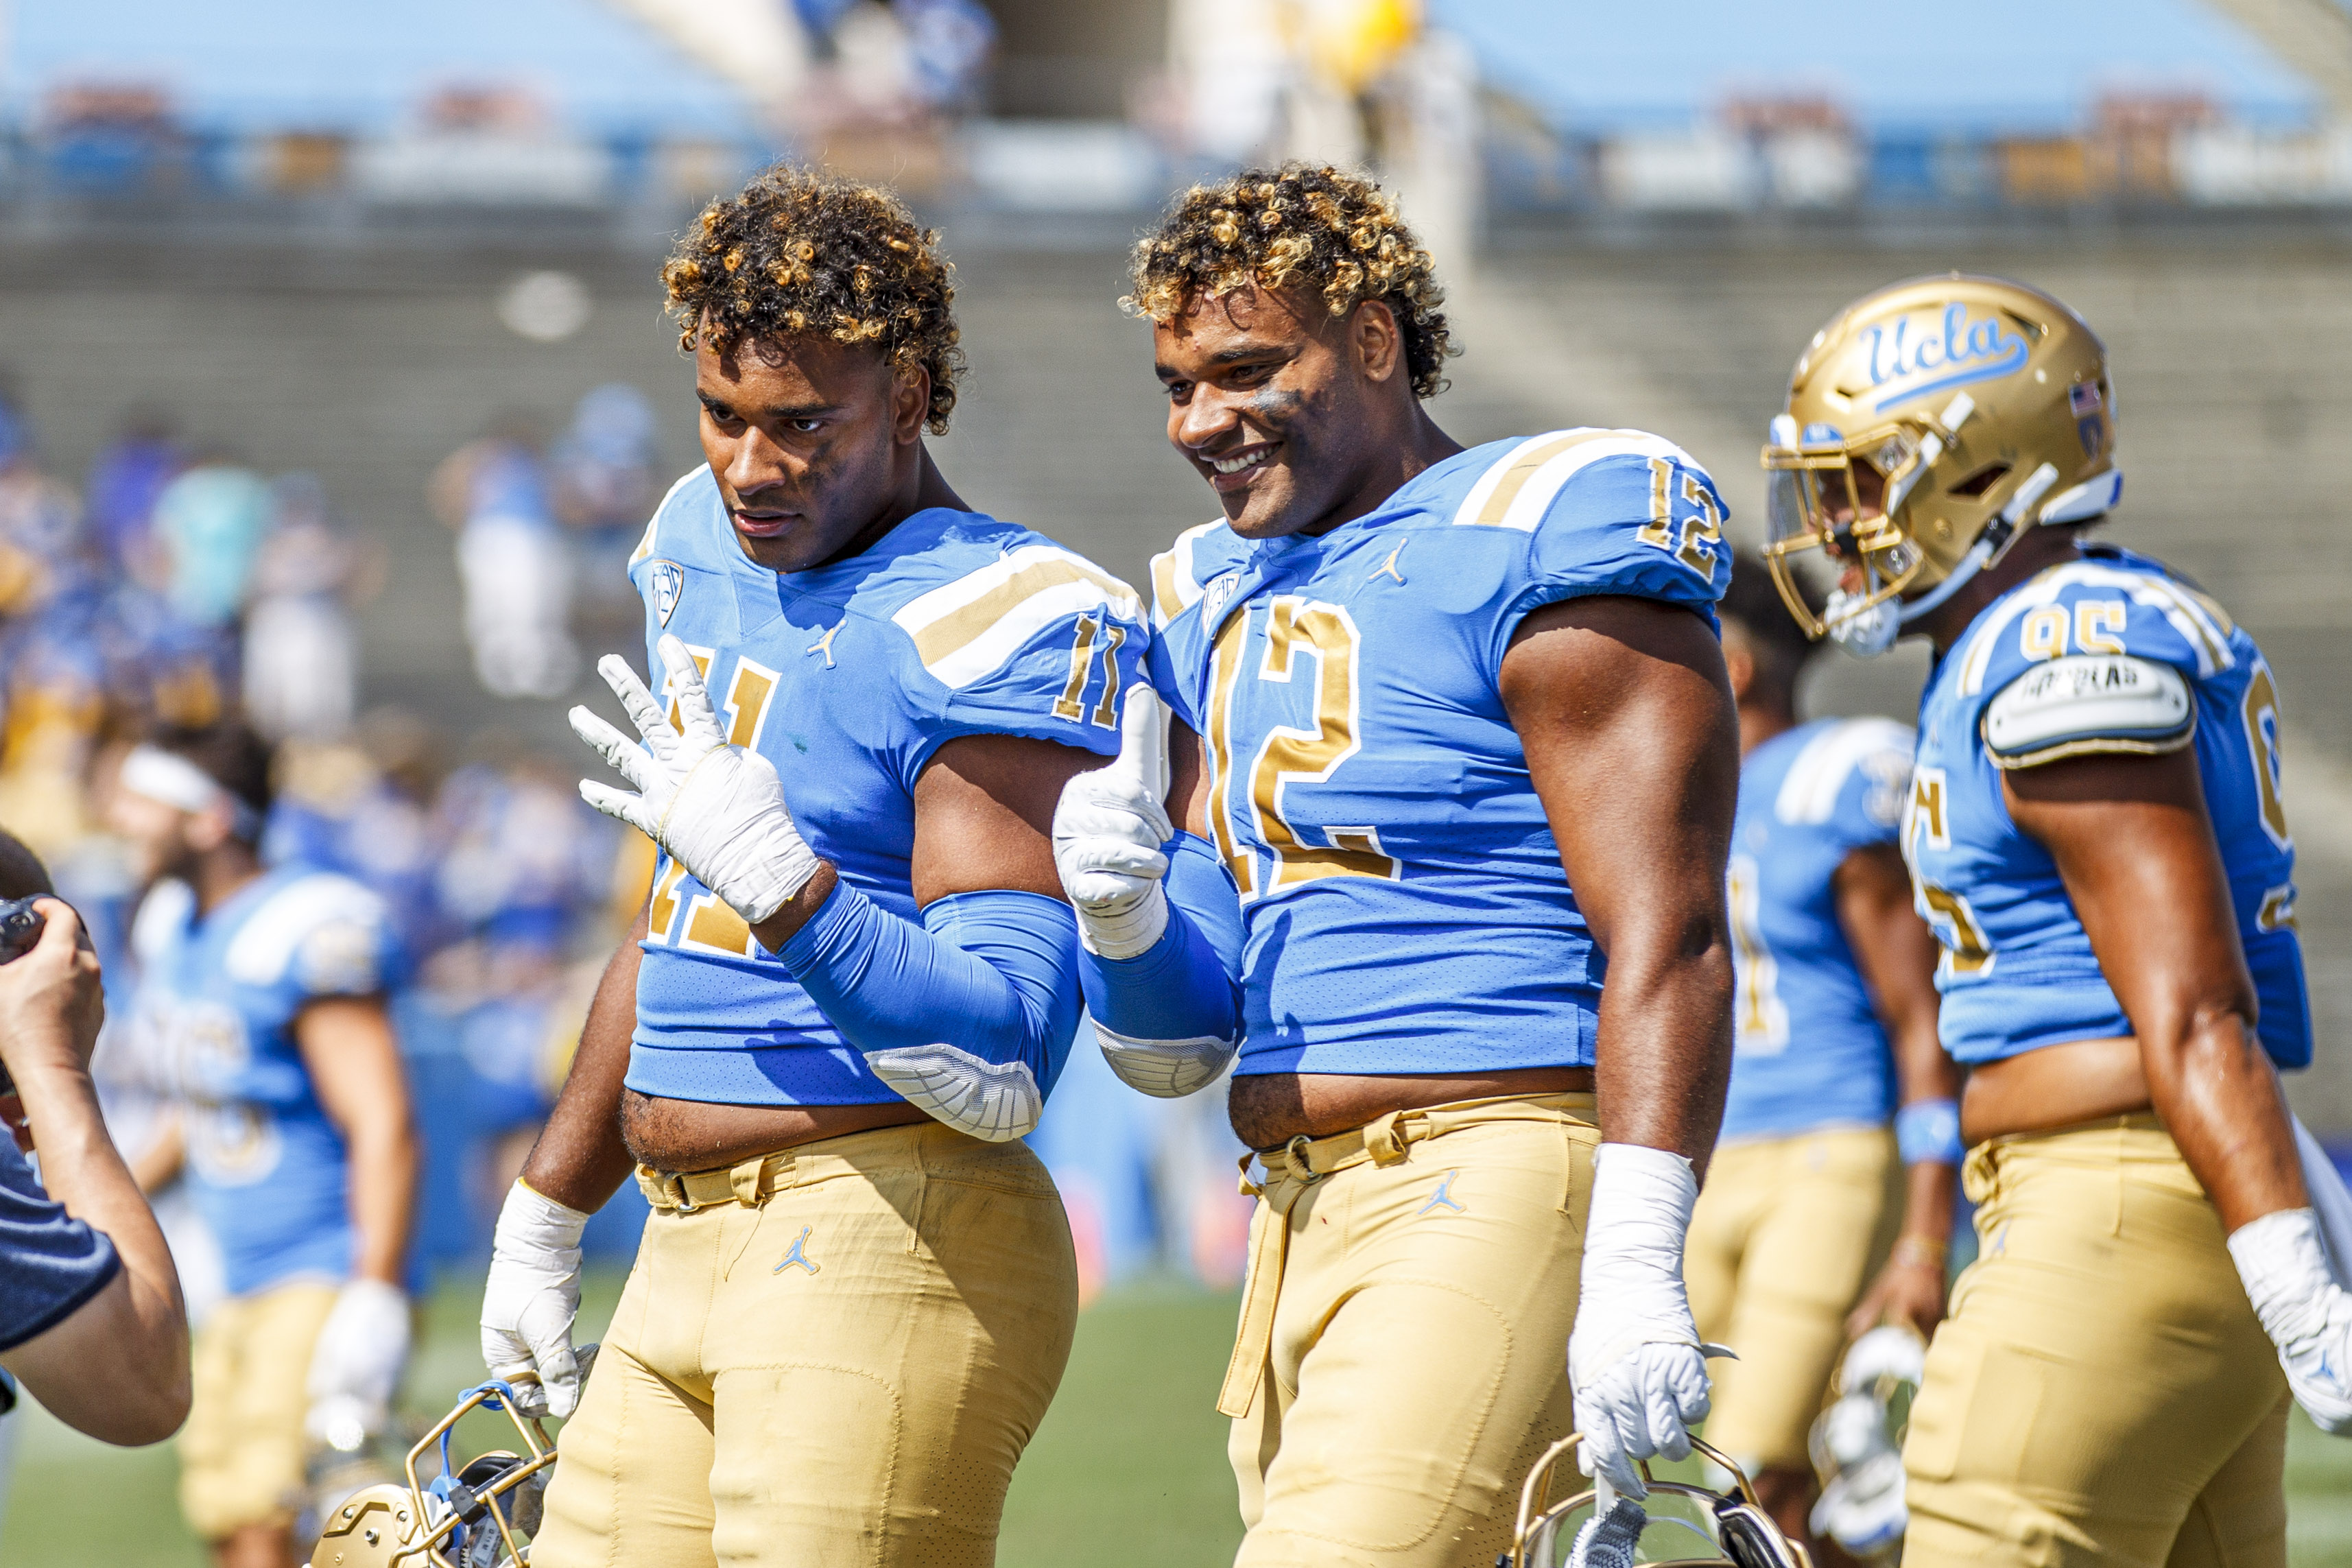 Gabriel and Grayson Murphy get set for 2nd season with UCLA football